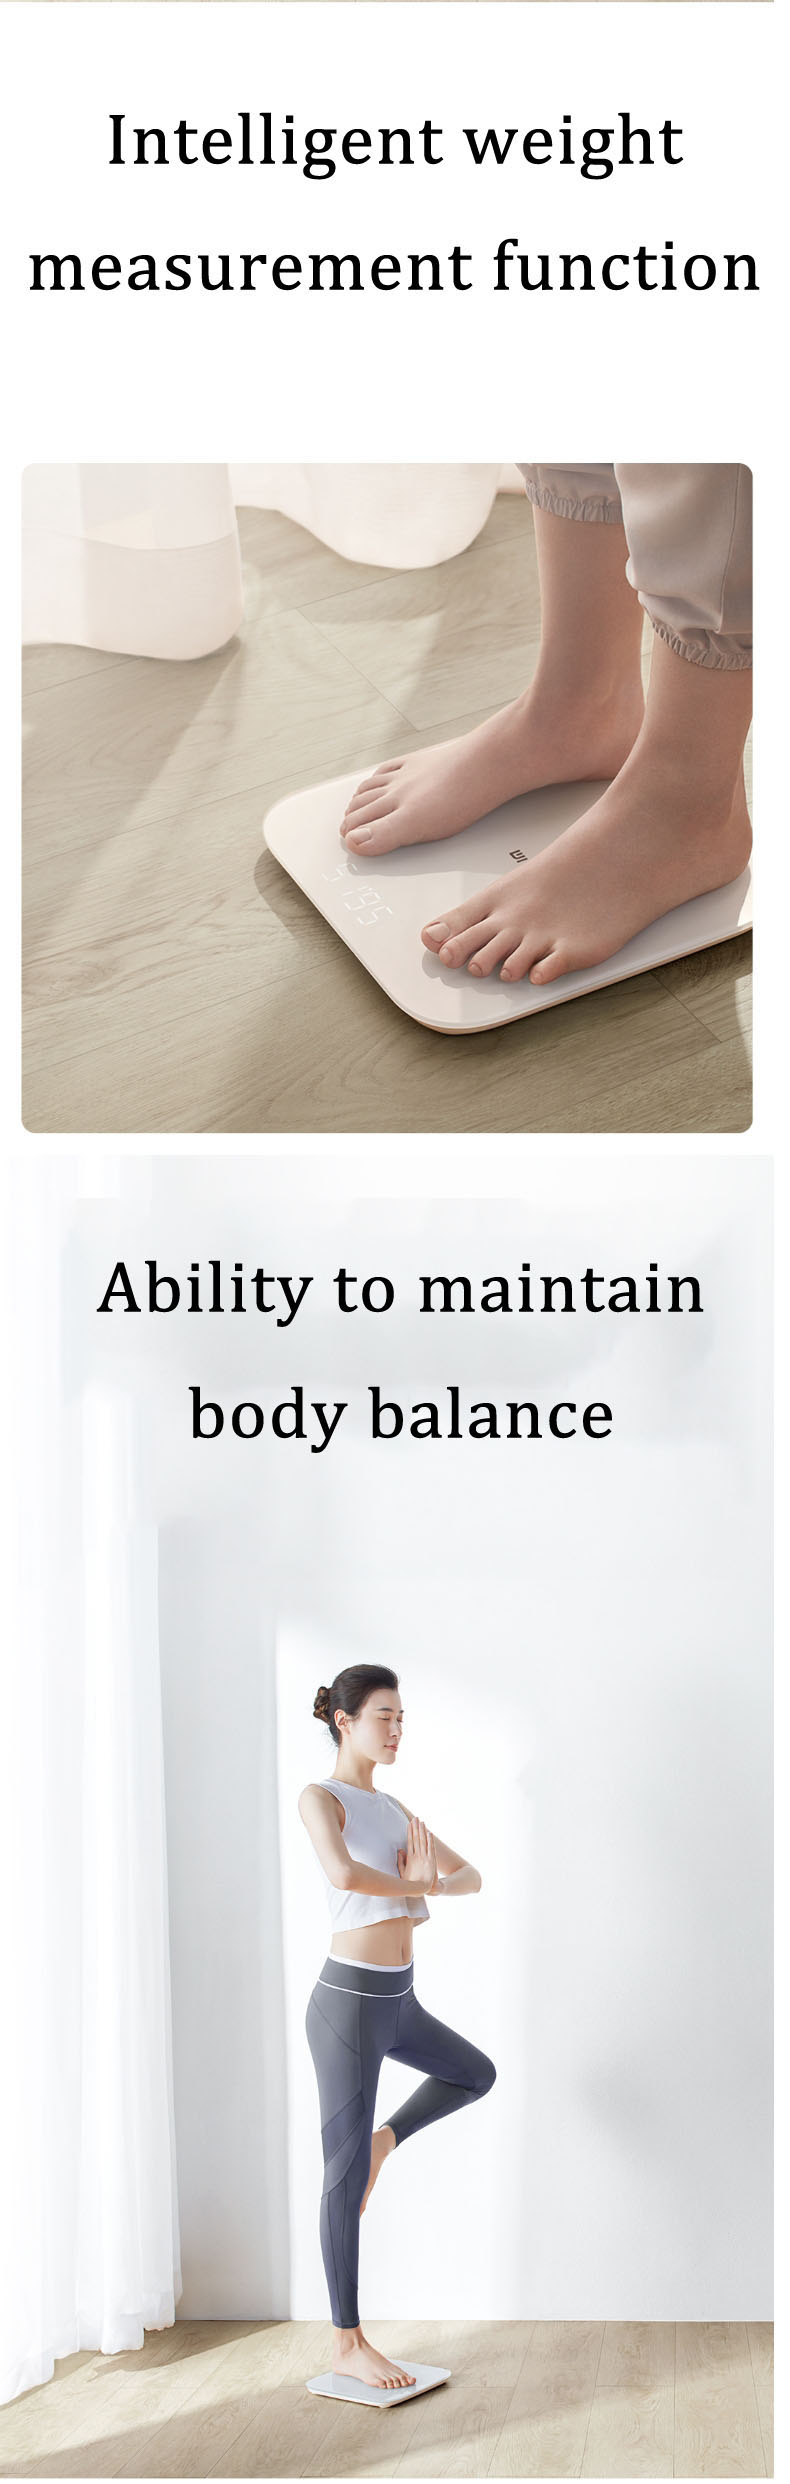 XIAOMI 2.0 Intelligent bluetooth Weight Scale Smart APP Control Precision Weight Scale LED Display Fitness Yoga Tools Scale Support Android IOS 12